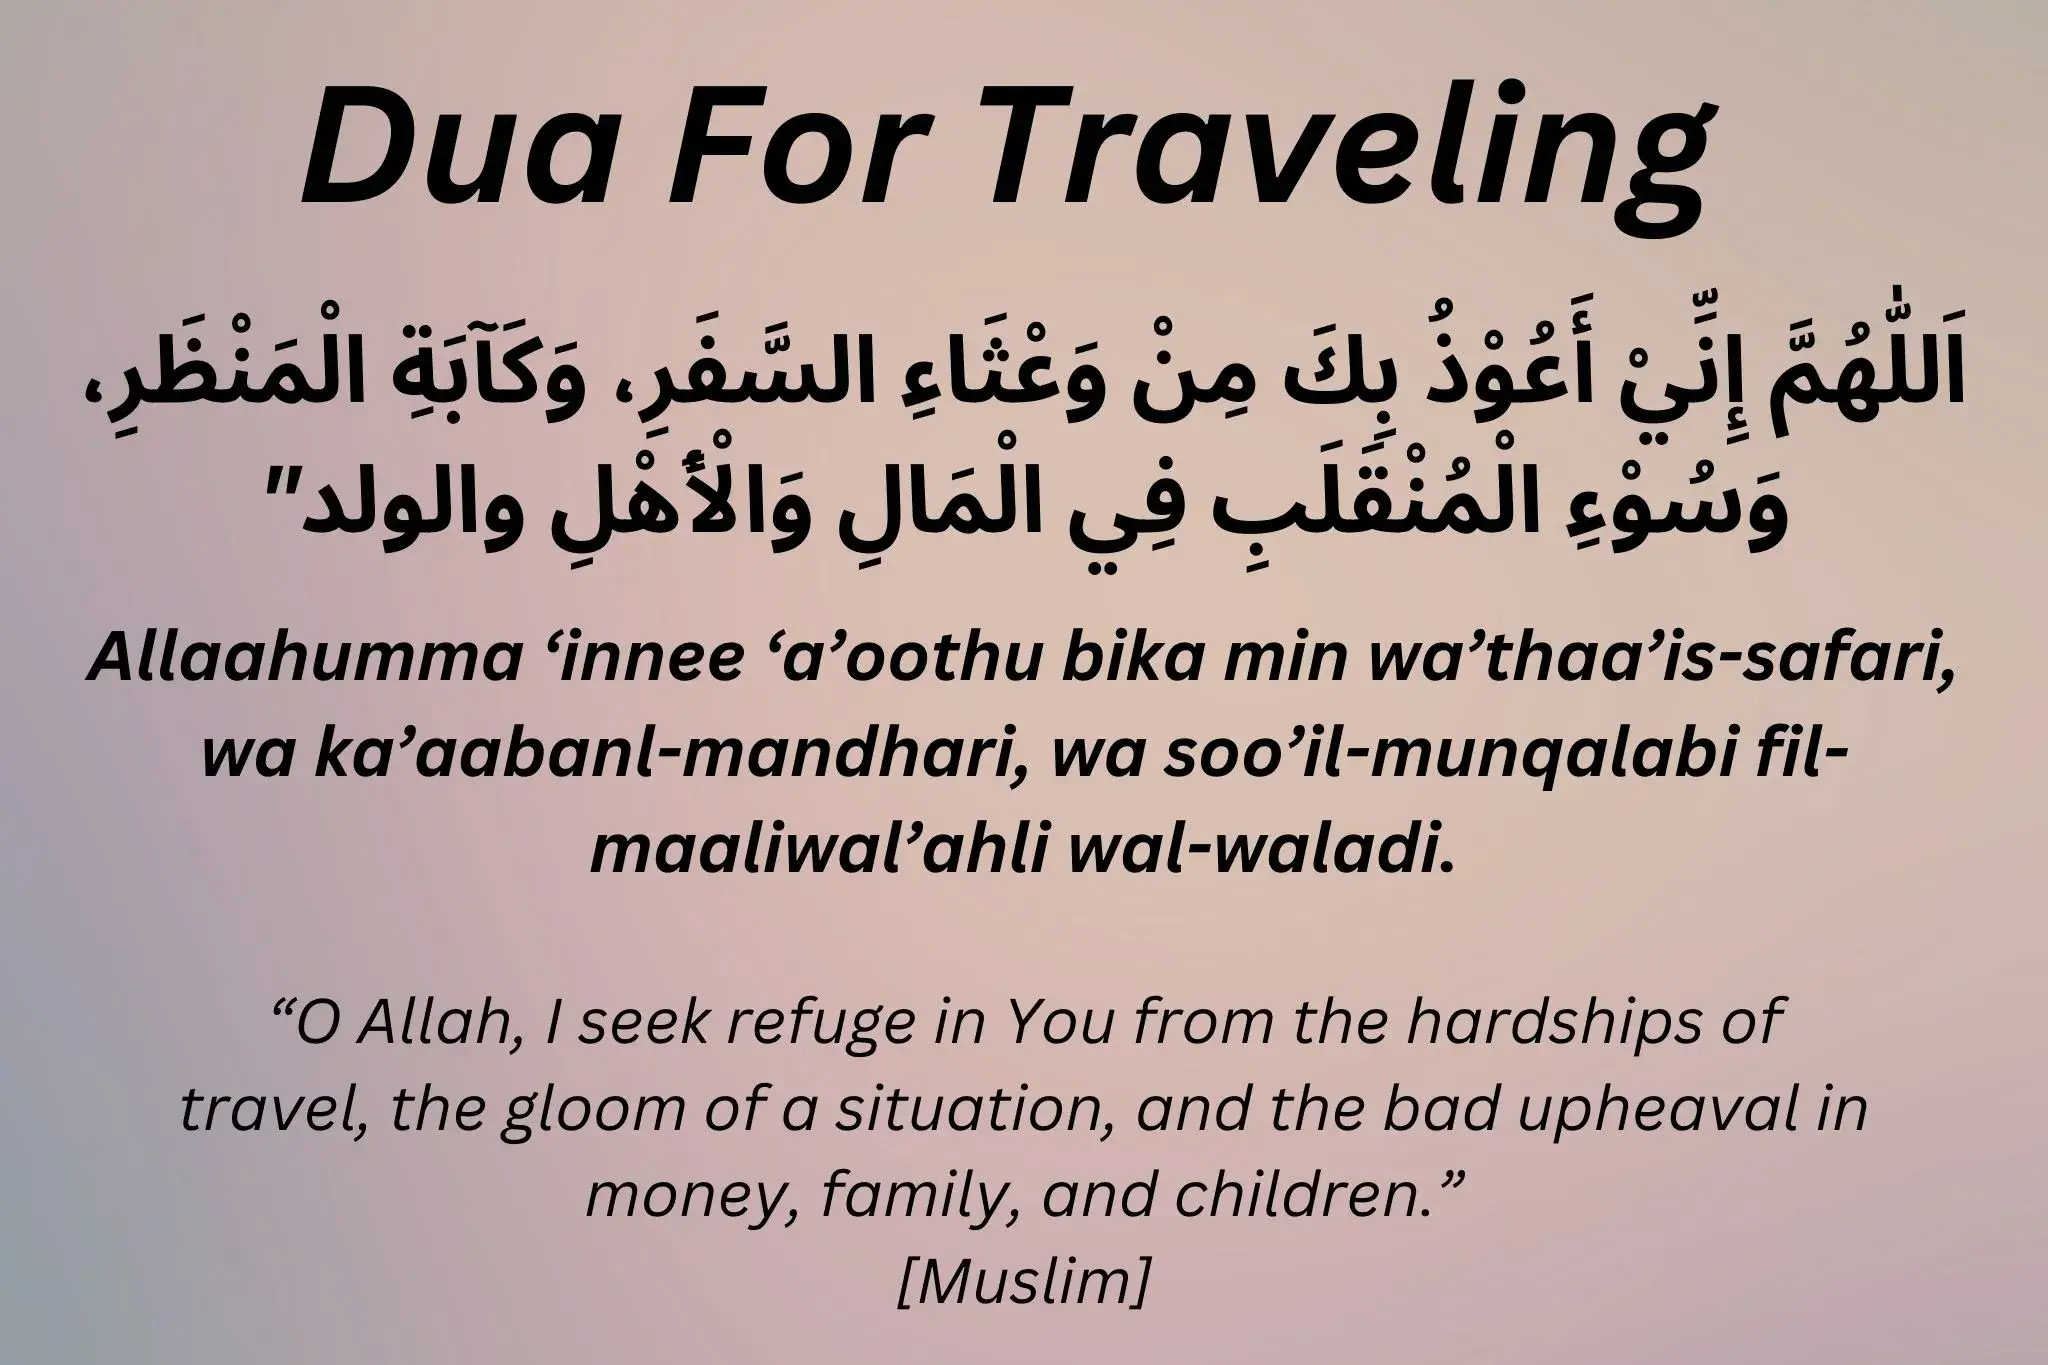 dua for traveling by plane